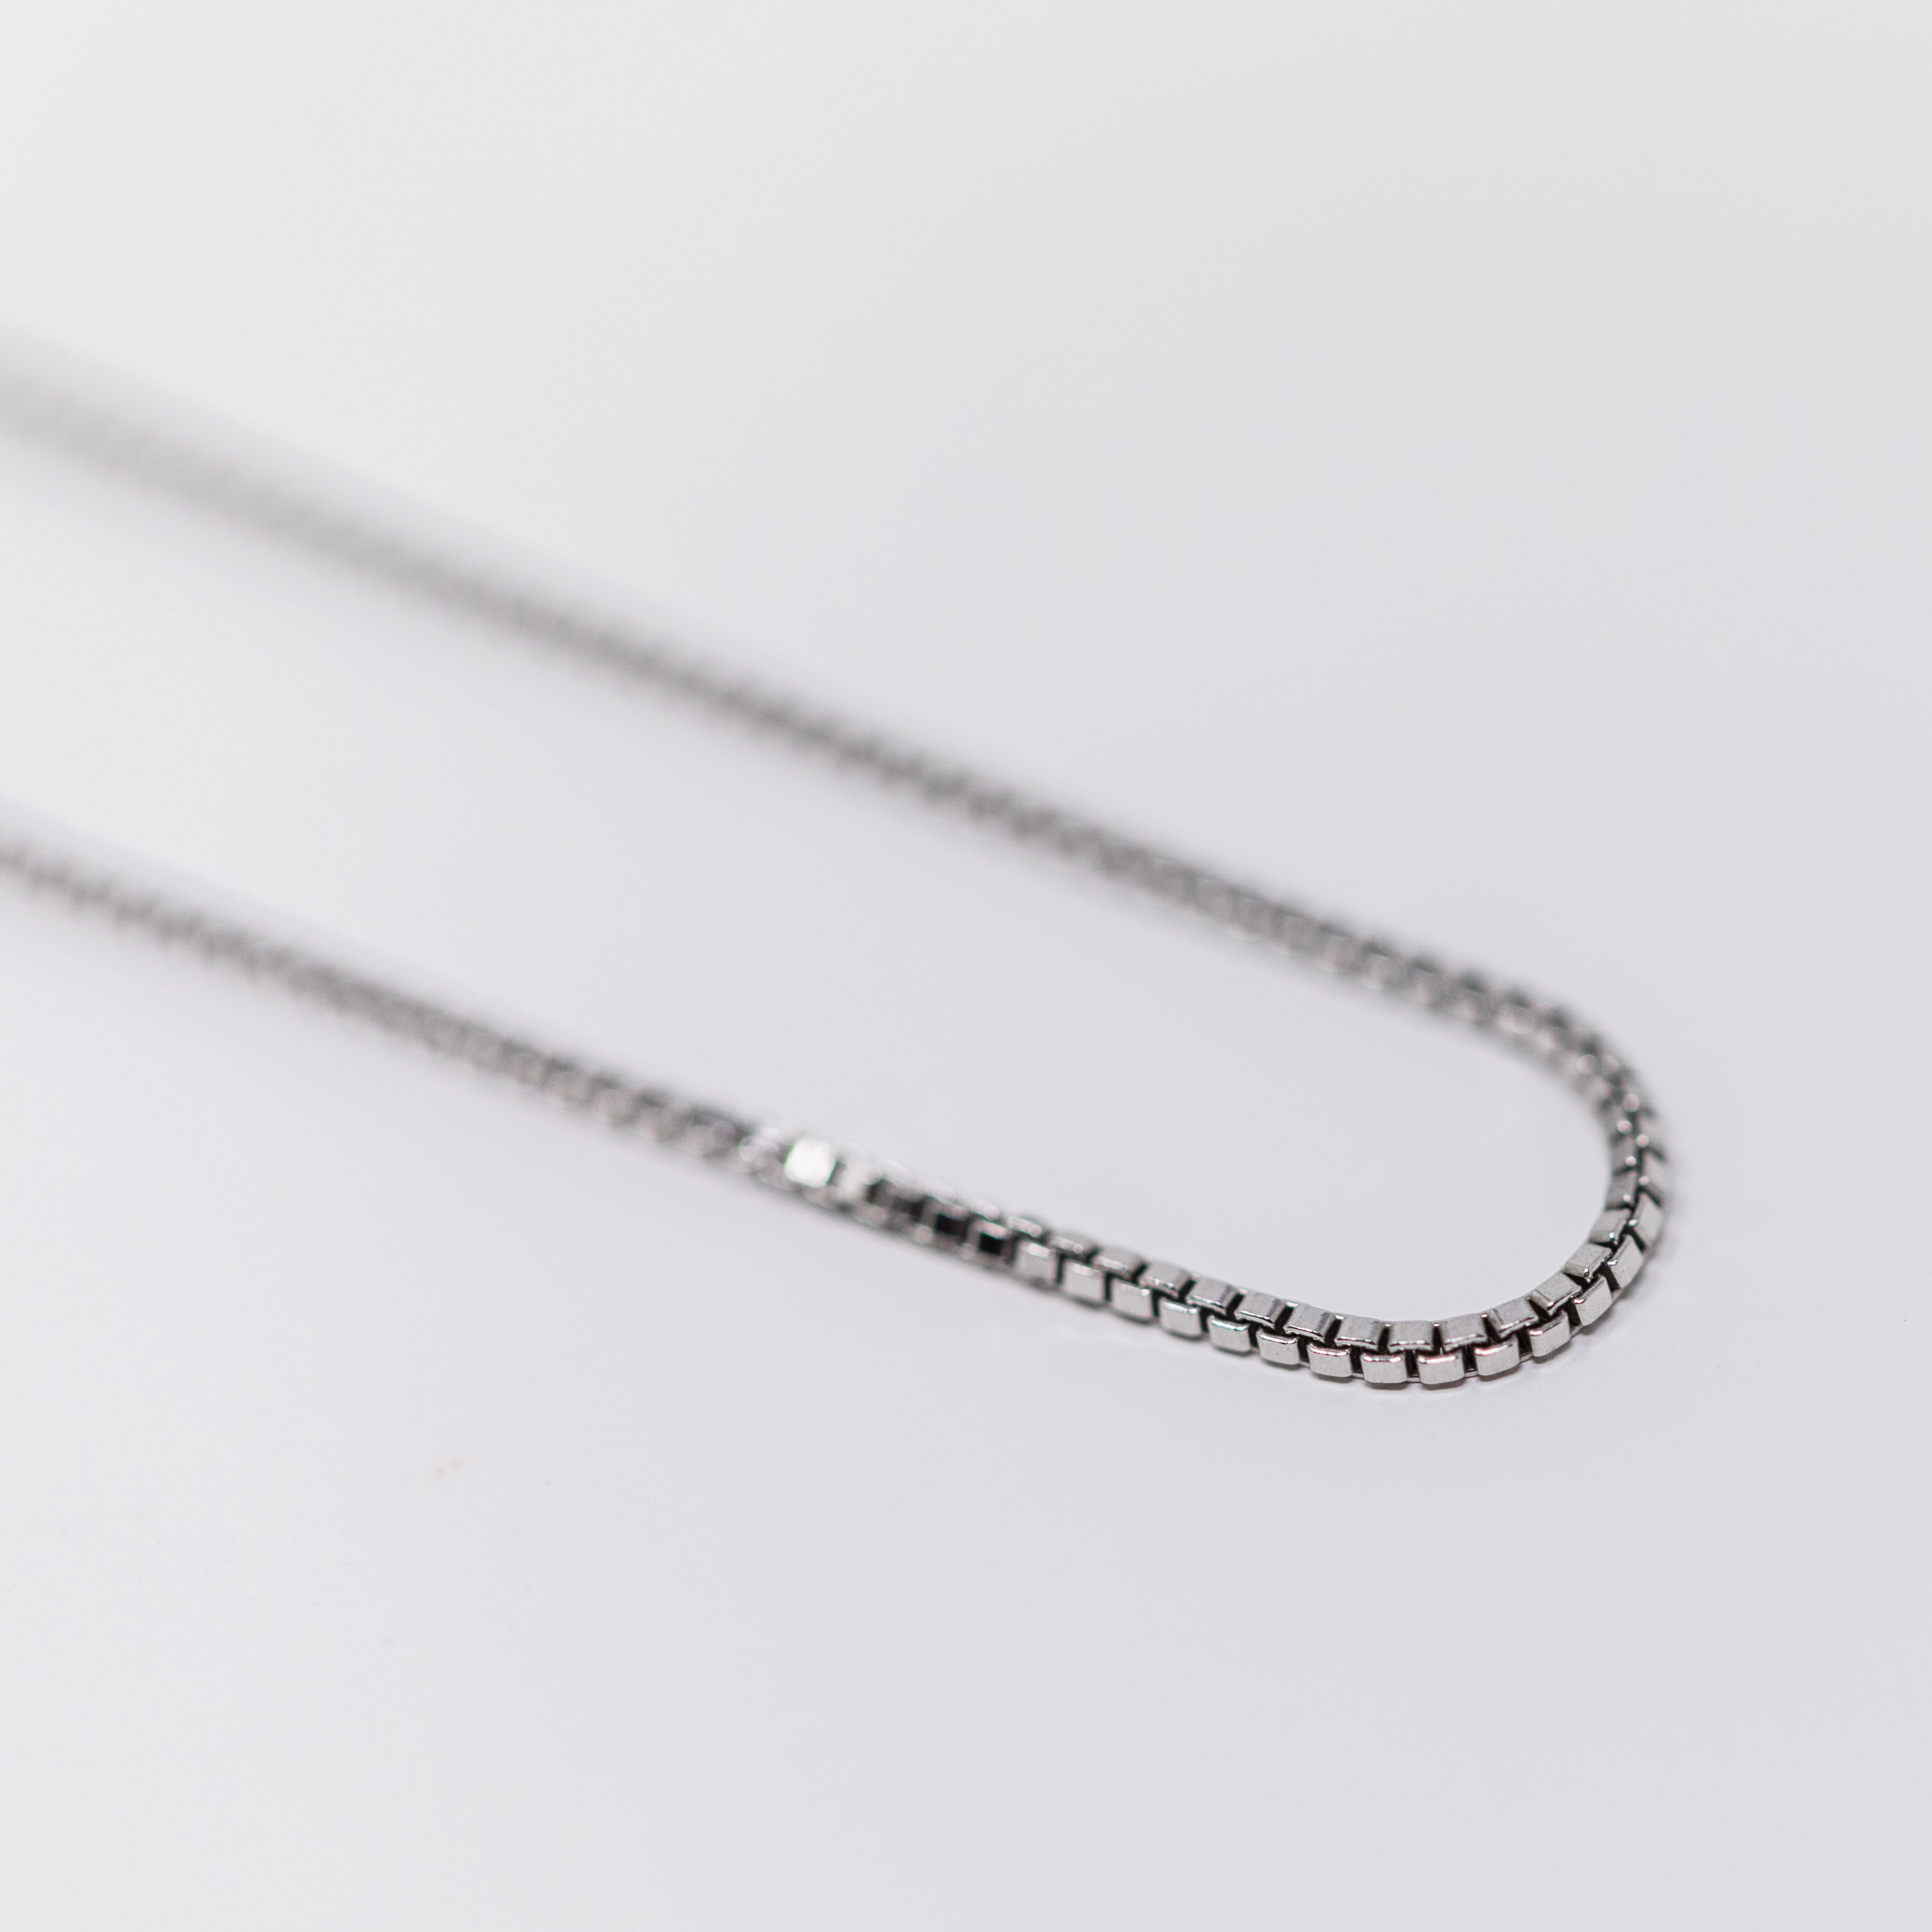 Real Solid 925 Sterling Silver Box Chain 1-4mm Necklace Men Ladies 16-30